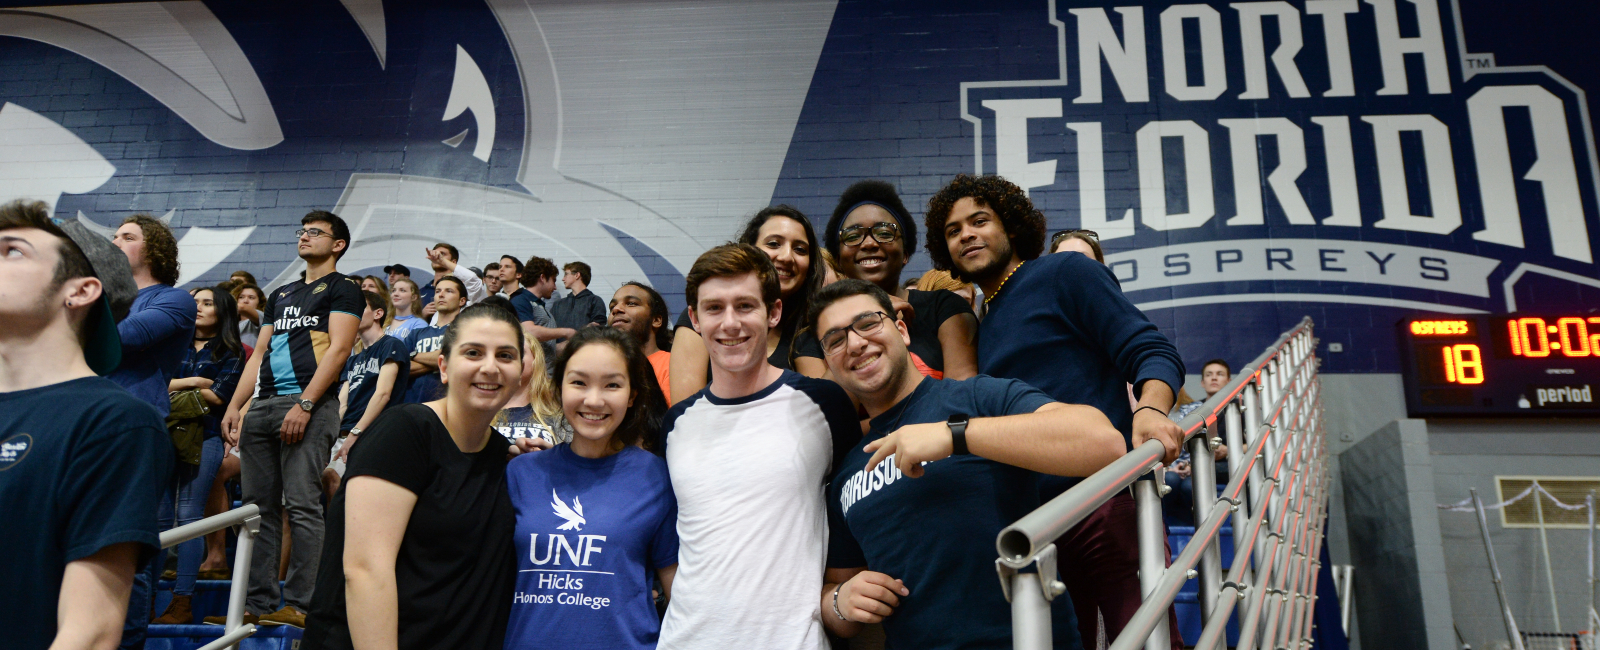 Large group of students at a UNF basketball game all grouped together and smiling